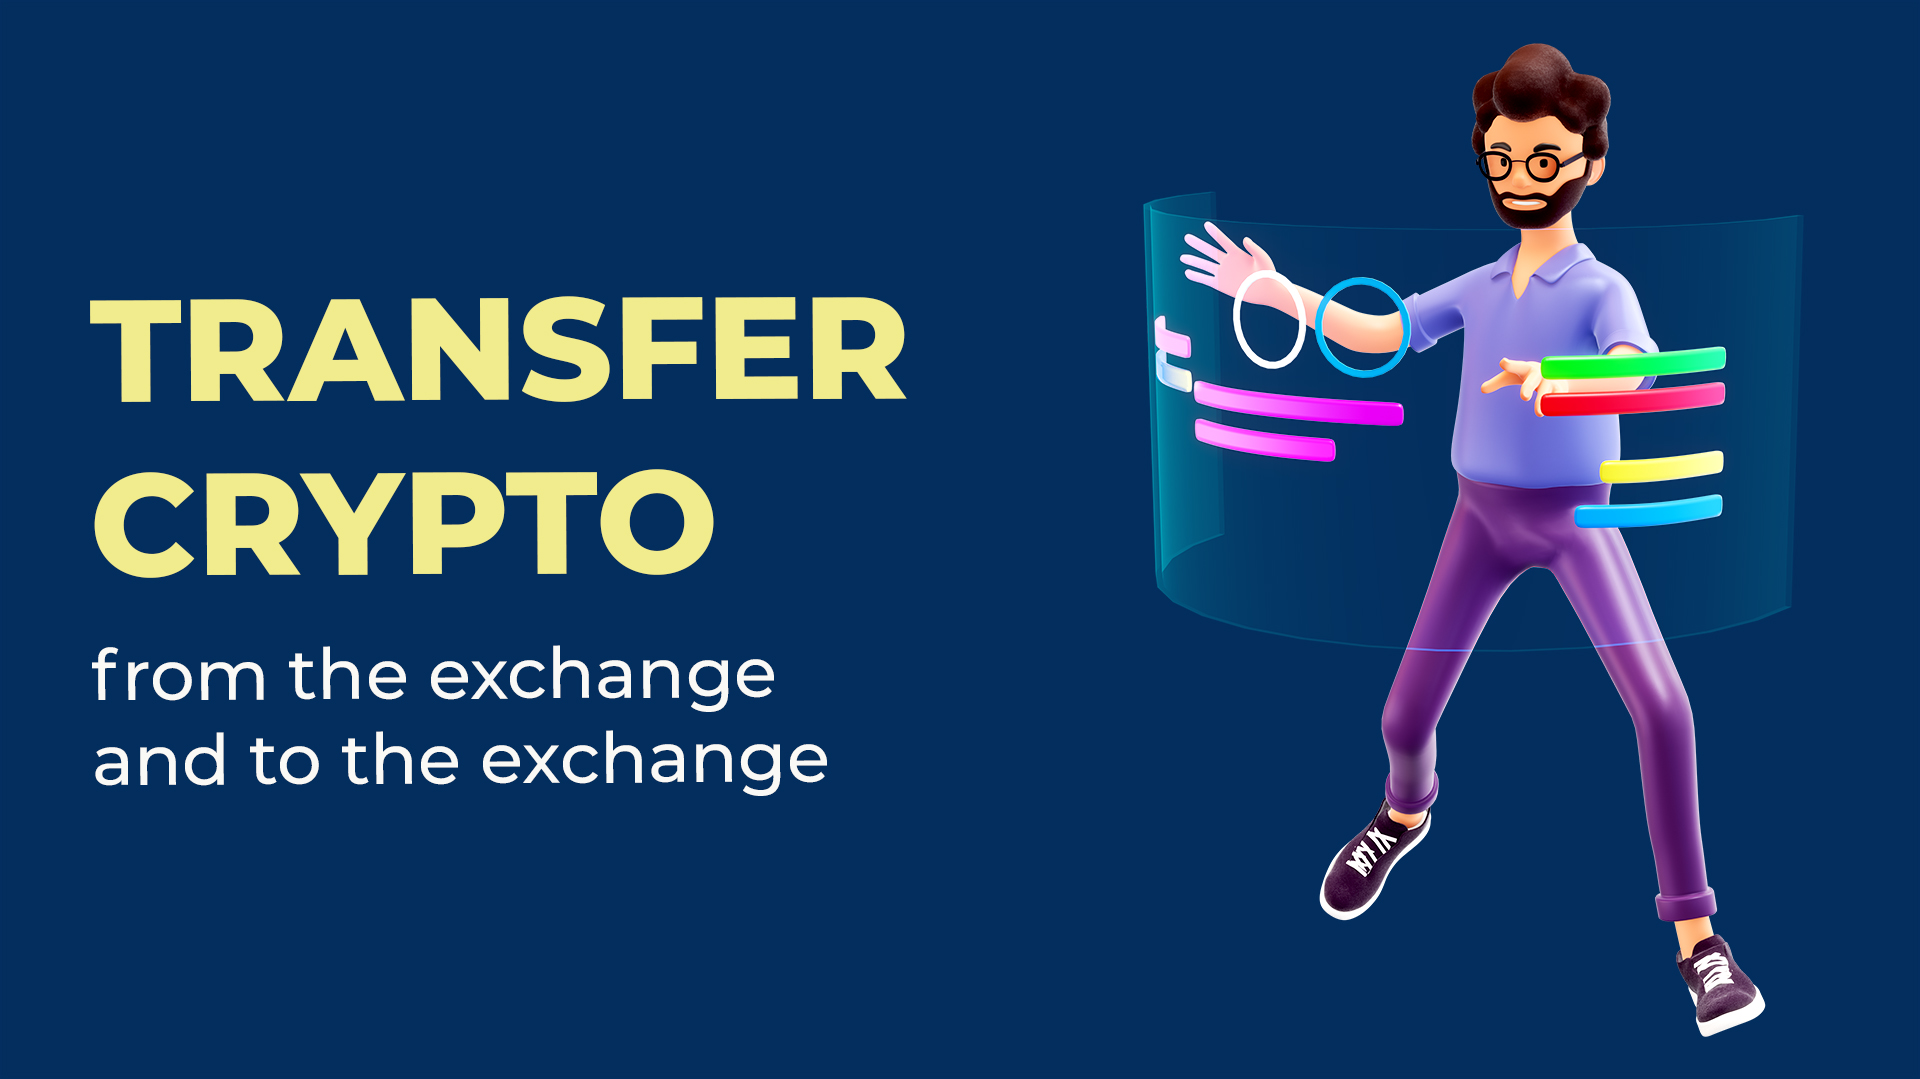 Transfer cryptocurrency from the exchange